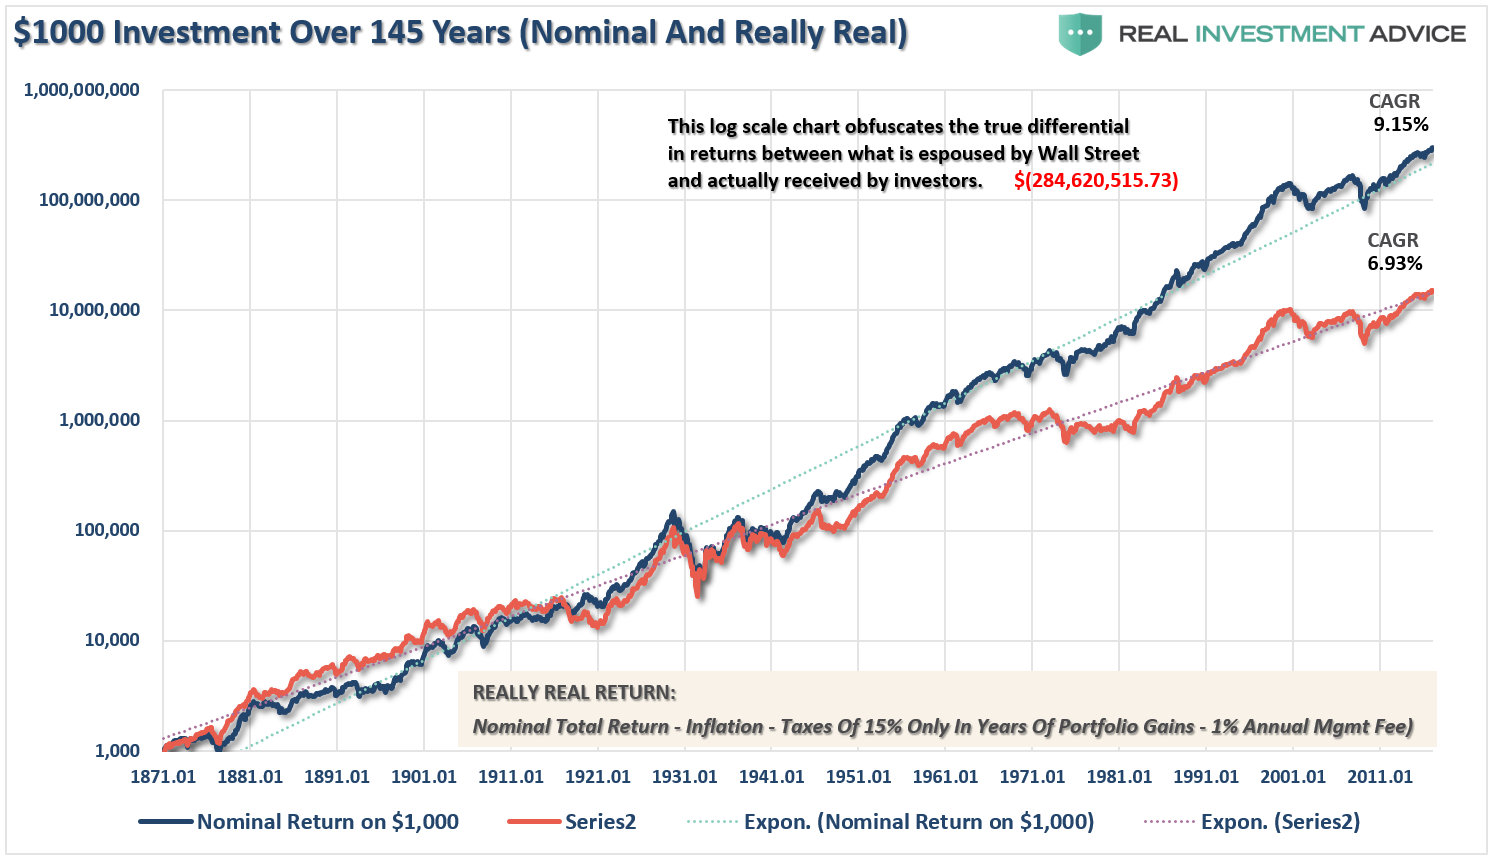 $1000 Investment: Real and Nominal Returns